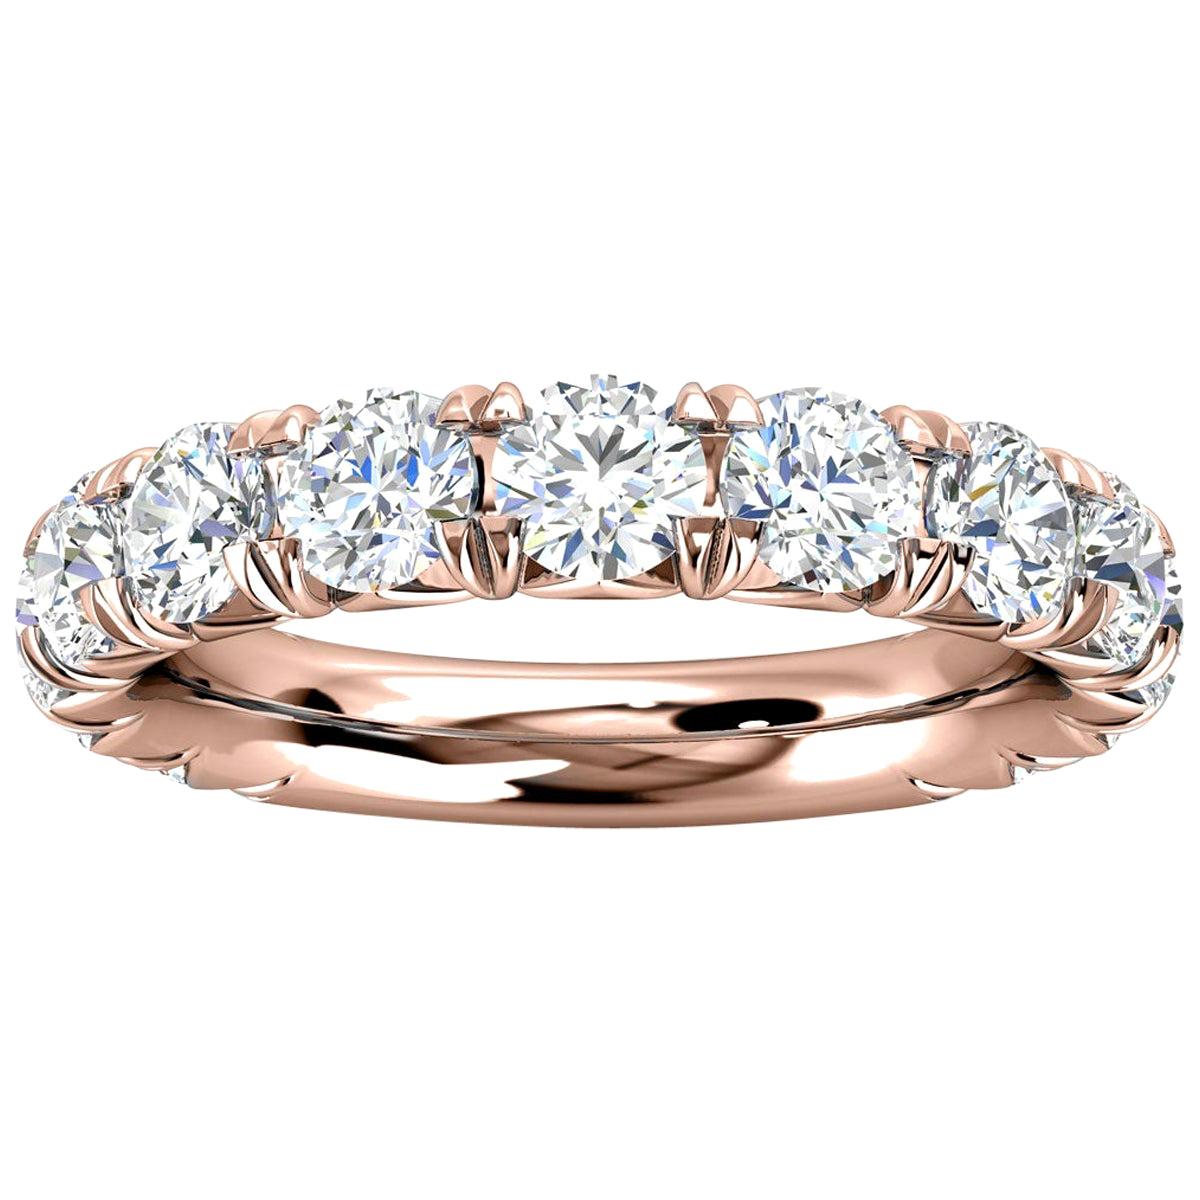 For Sale:  14k Rose Gold GIA French Pave Diamond Ring '2 Ct. tw'